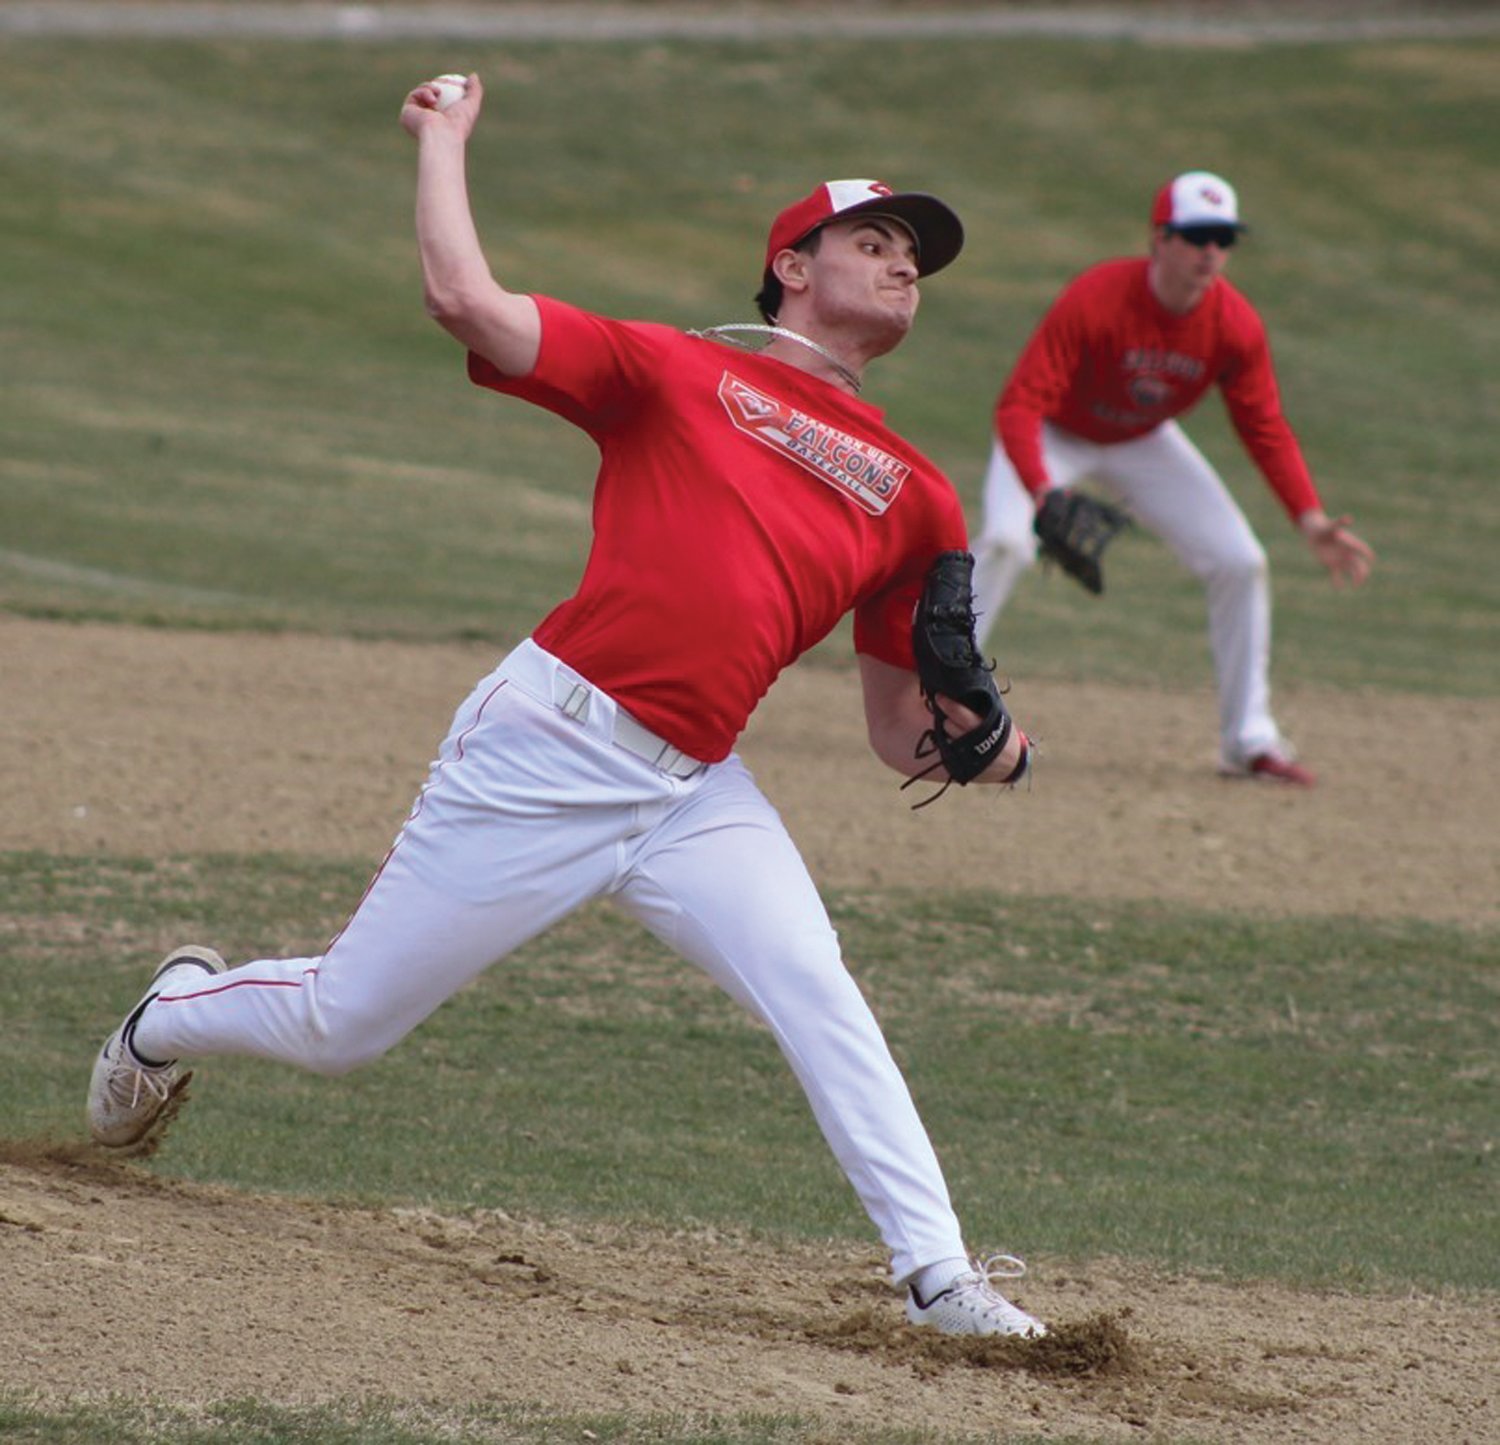 GETTING STARTED: Cranston West starting pitcher Luciano Leone delivers a pitch during a scrimmage on Monday afternoon at West. (Photos by Alex Sponseller)